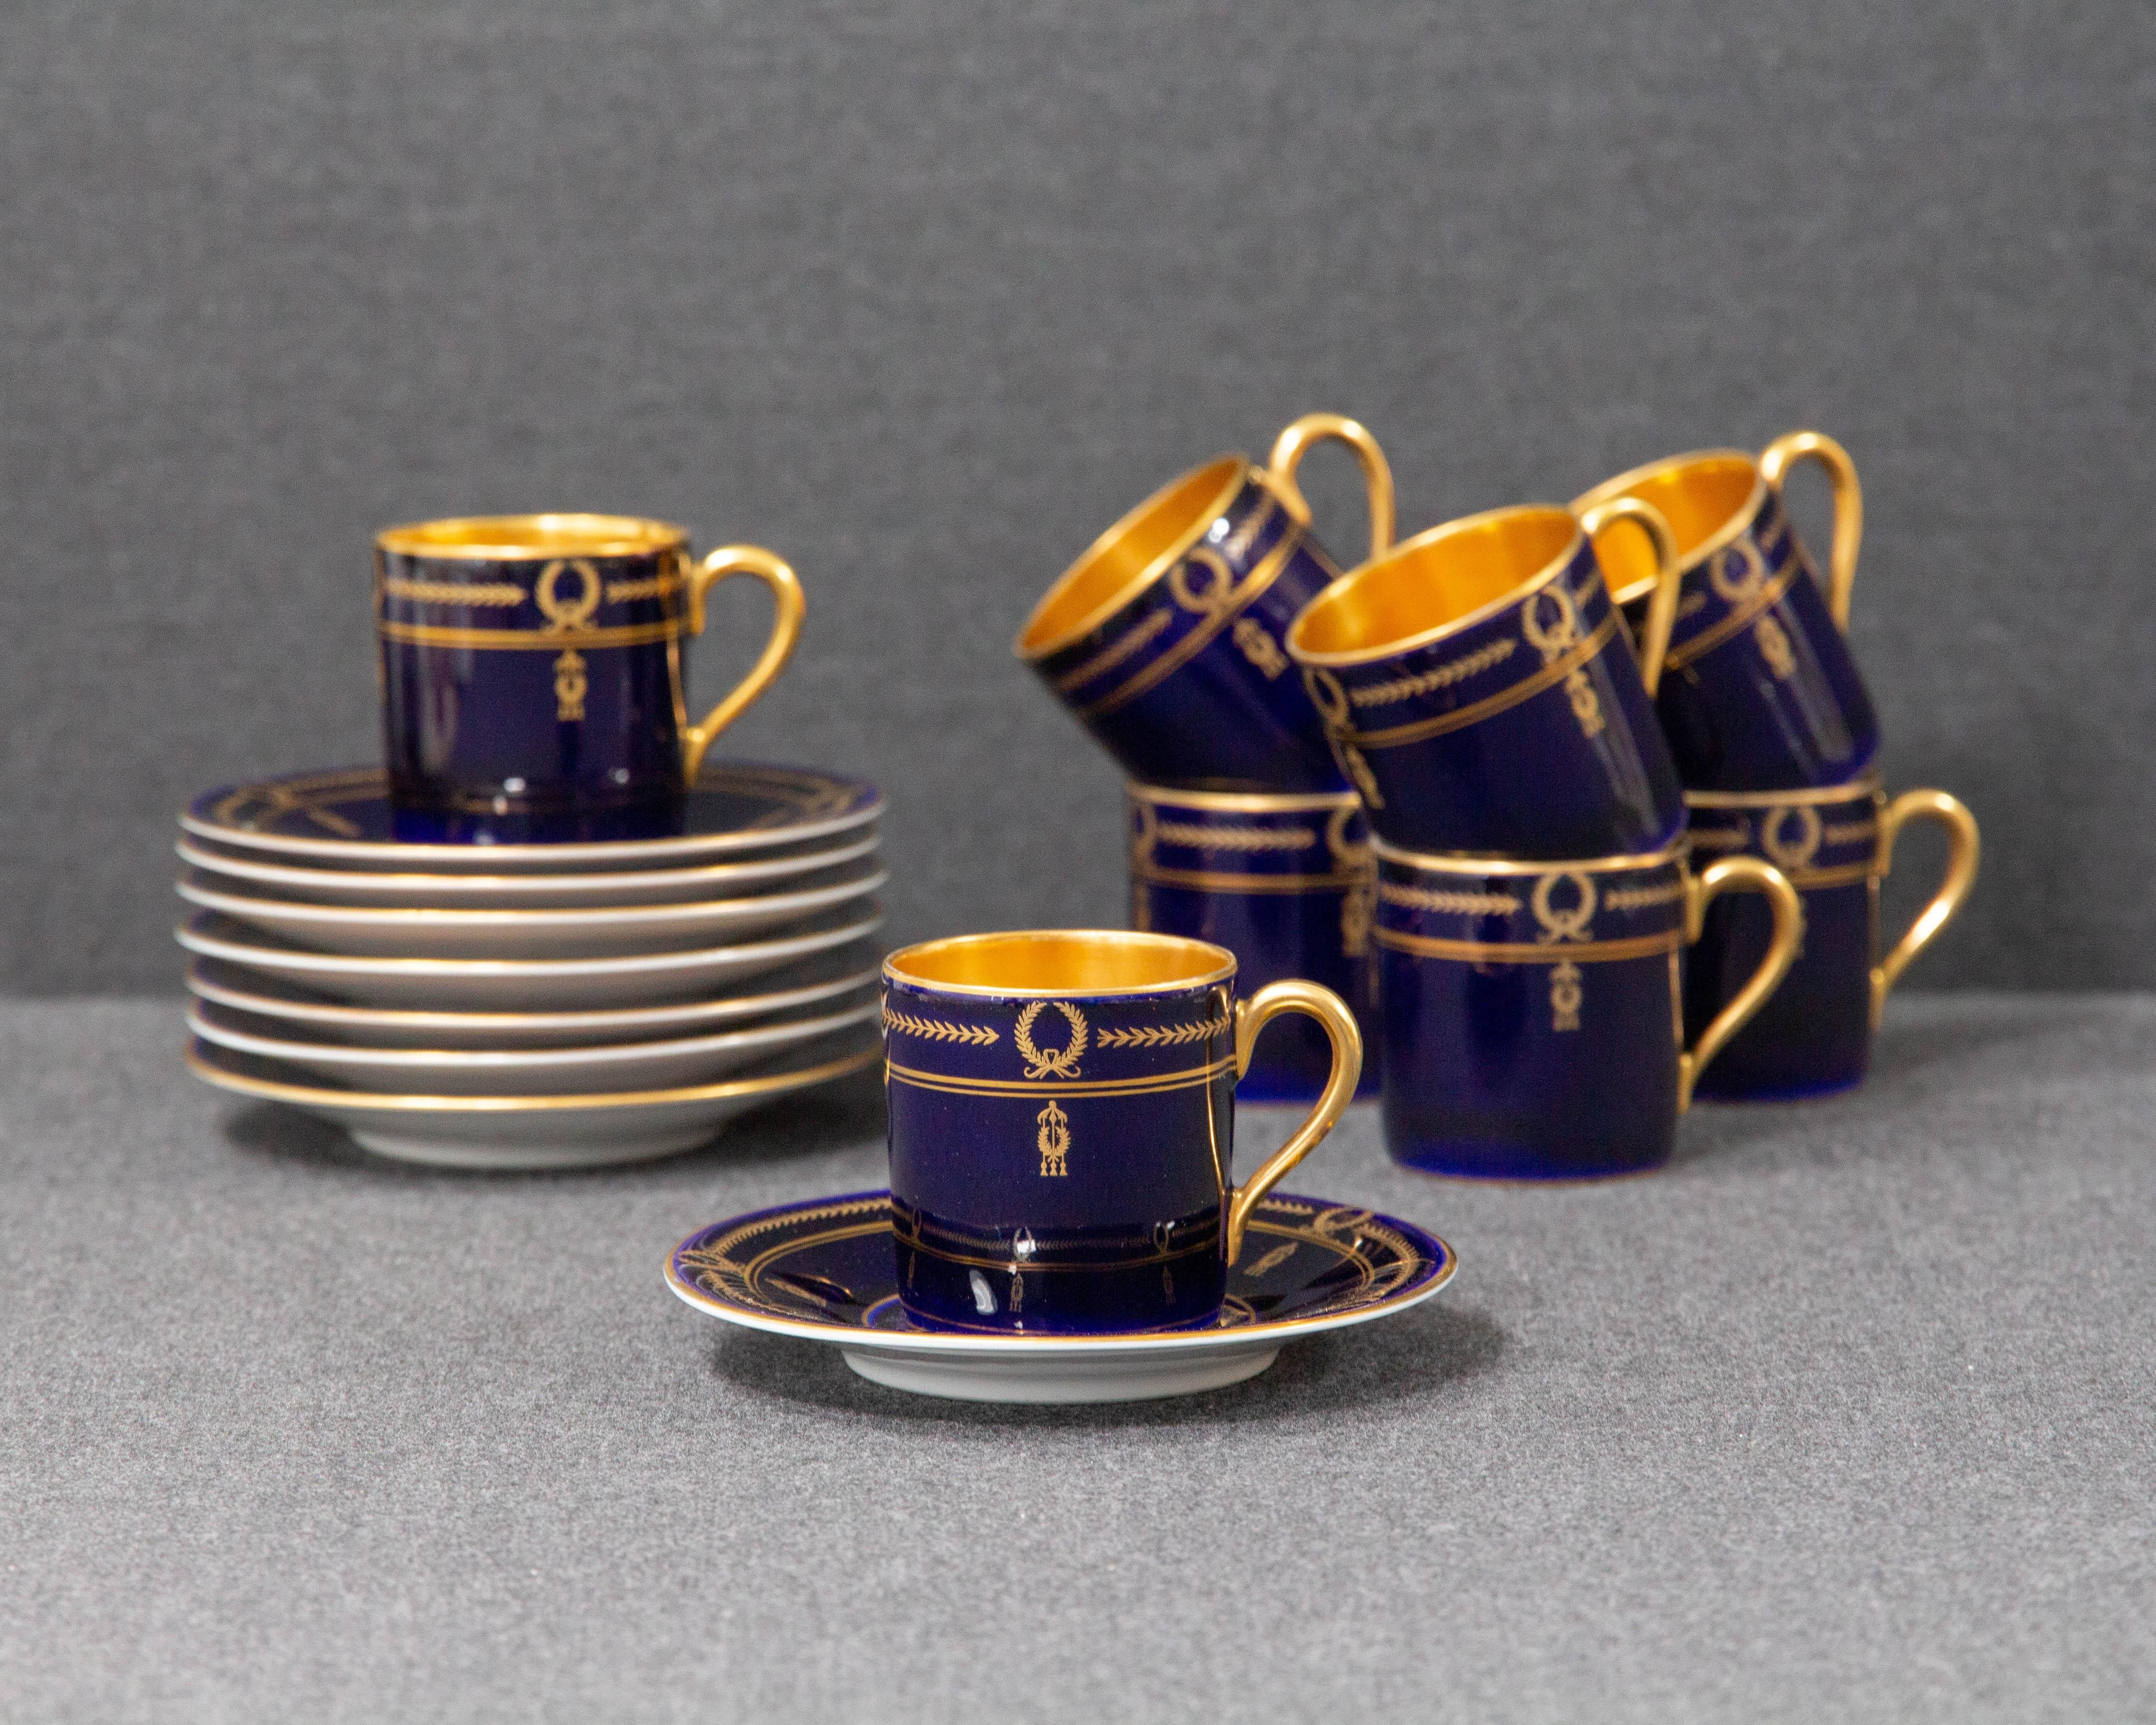 Empire Rosenthal, D1245, Set of 8 Demitasse Cups and Saucers